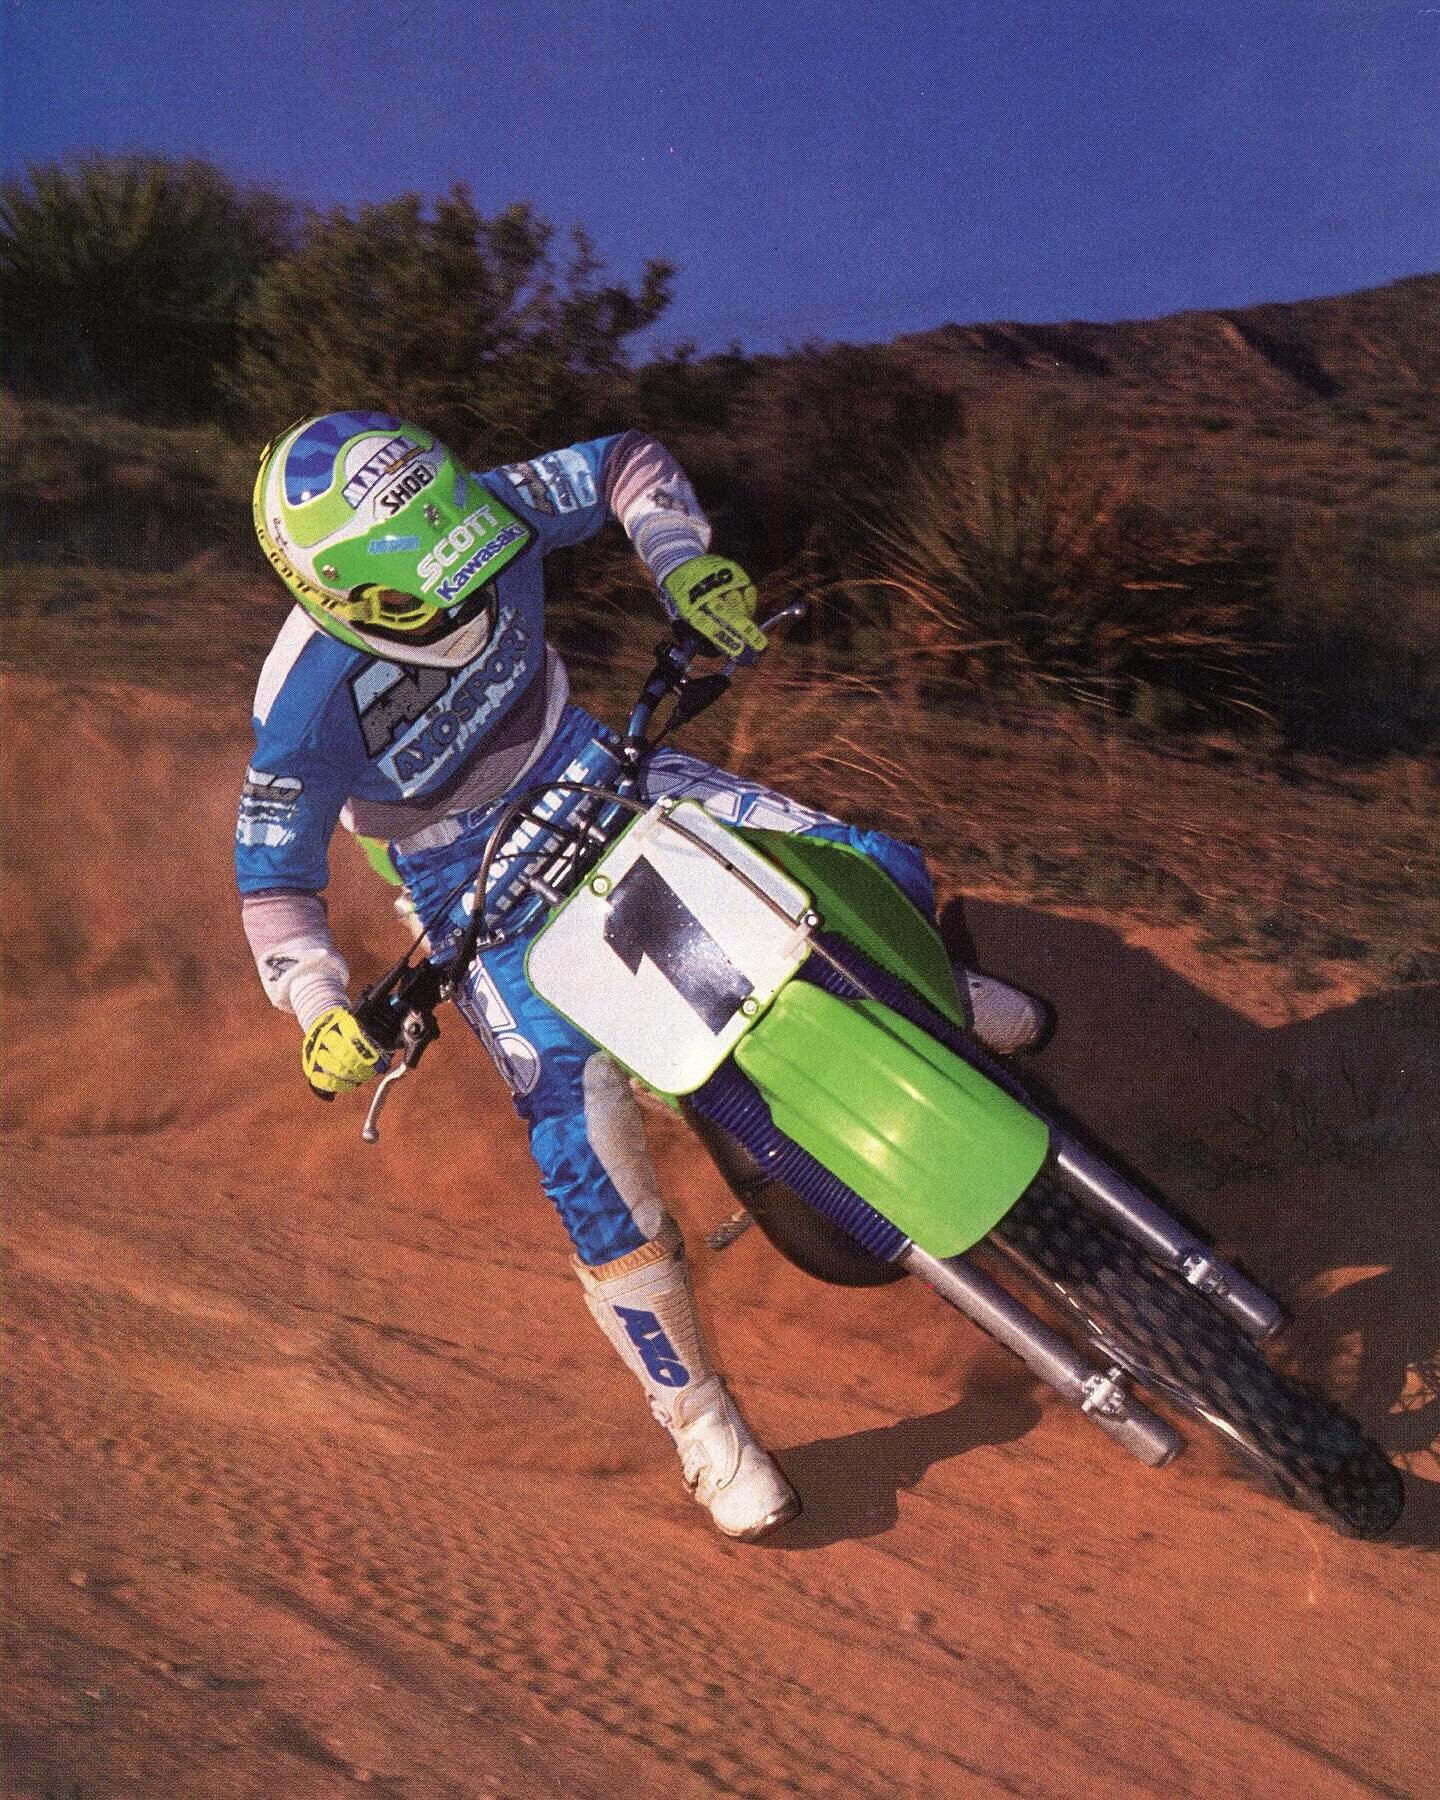 We&rsquo;re super excited to have legendary female mx racer Mercedes Gonzalez-Natvig joining us at our West Coast event at Fox Raceway this year! 🙌

Mercedes is a professional Kawasaki and ProCircuit 💚 factory racer who has amassed a great number o